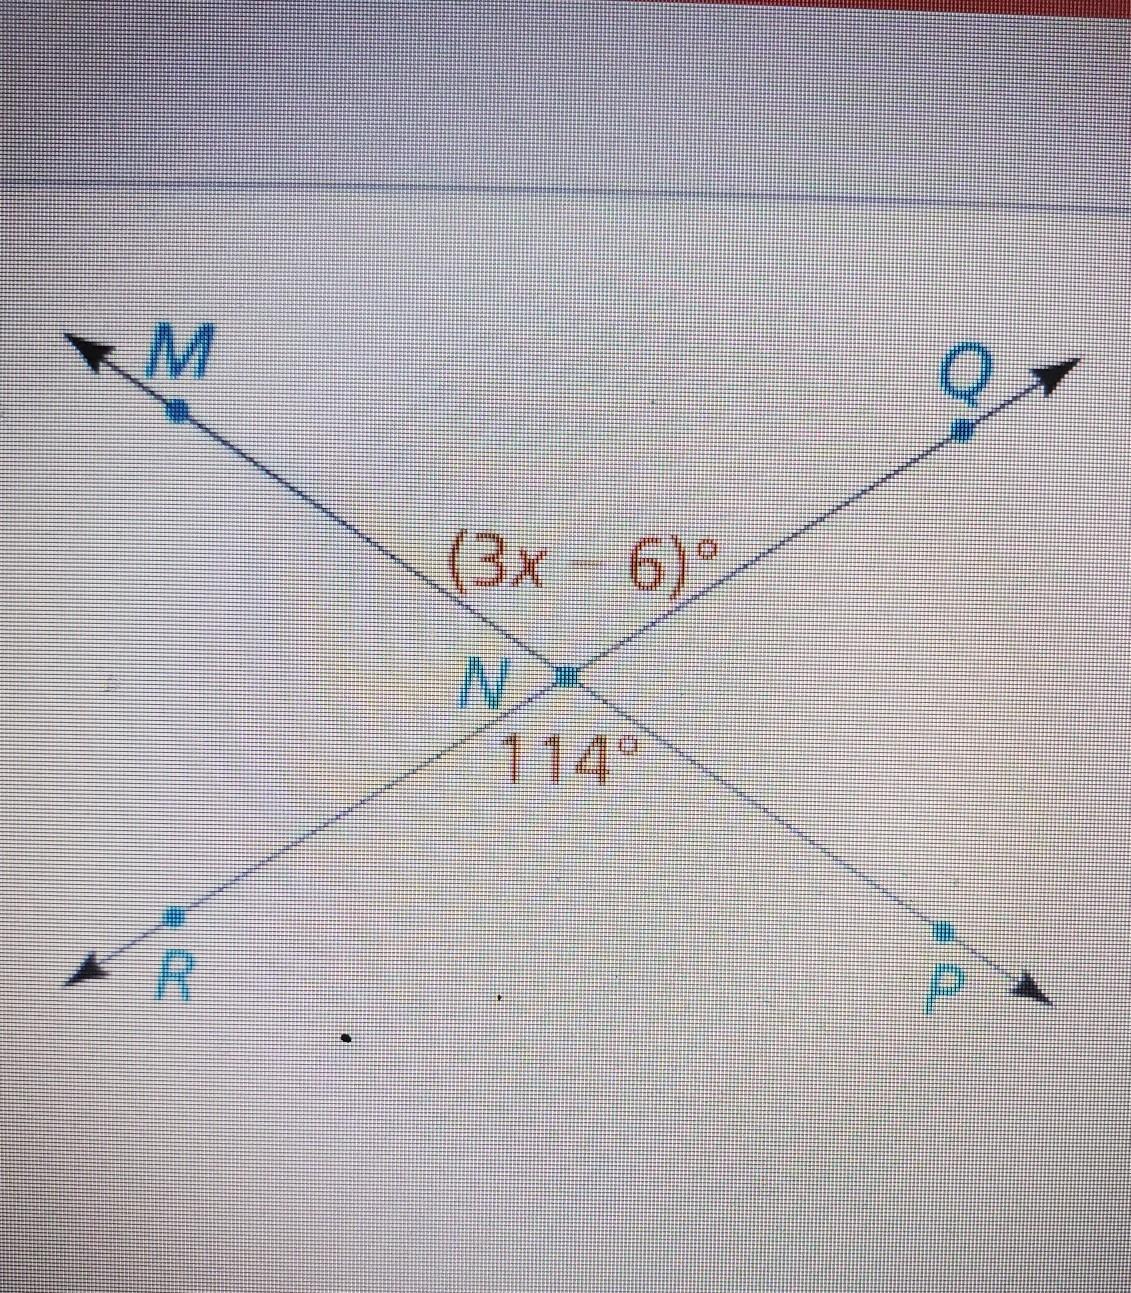 What's The Value Of X?